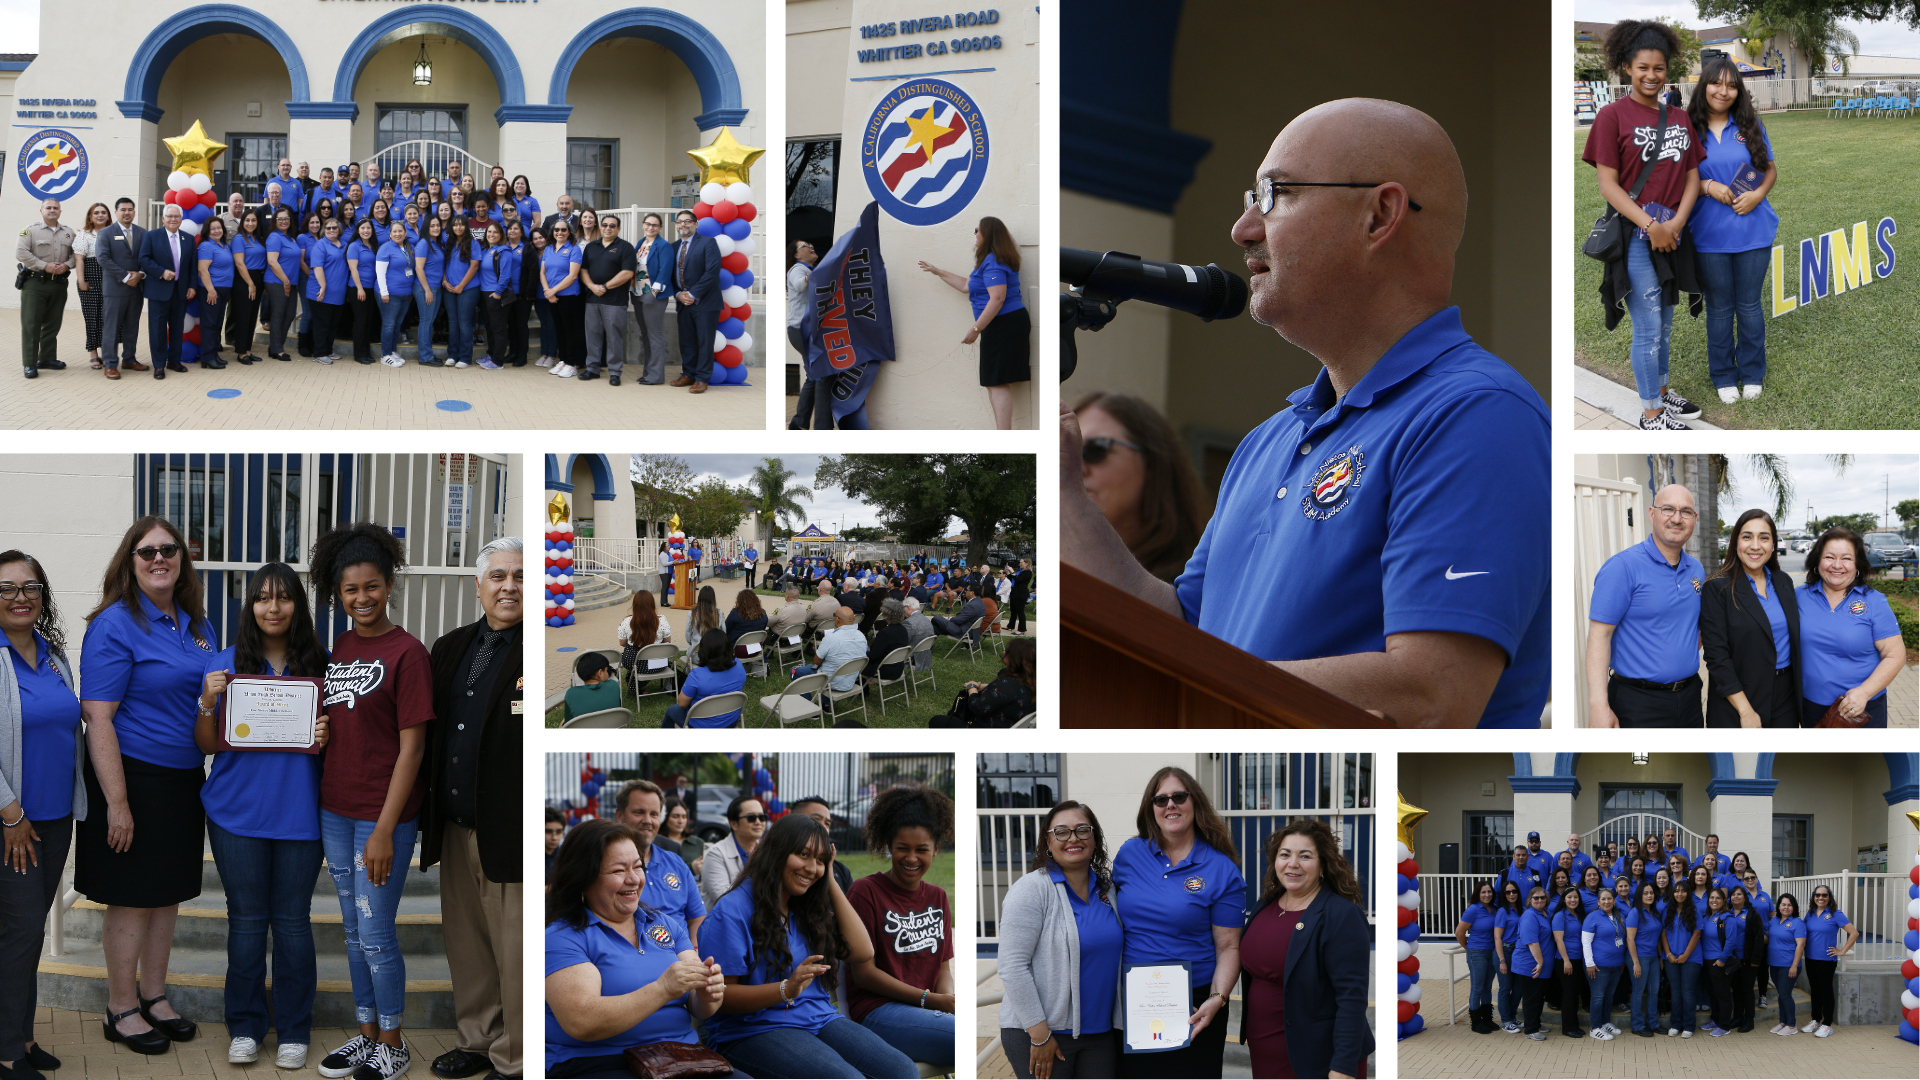 WHITTIER COMMUNITY LEADERS CELEBRATE THE LOS NIETOS MIDDLE SCHOOL’S CALIFORNIA DISTINGUISHED SCHOOL AWARD WITH A COMMUNITY CELEBRATION